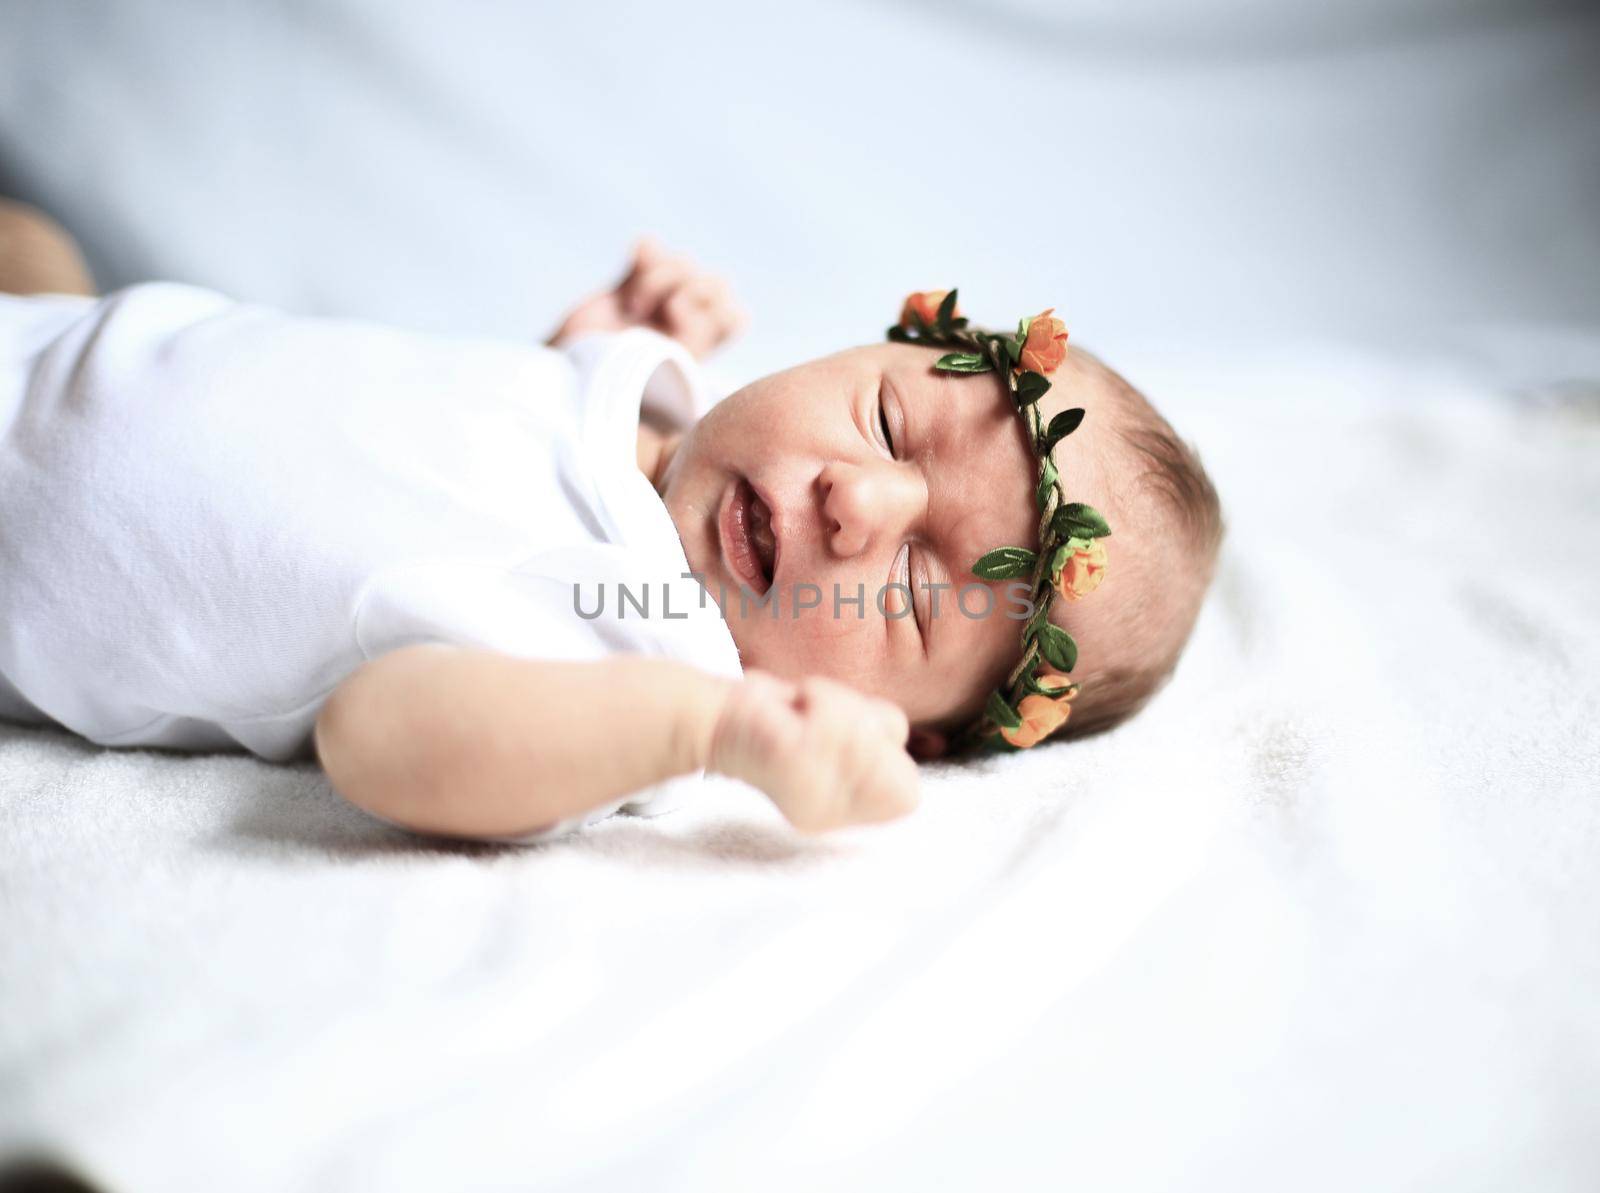 serene newborn baby in the wreath lying on the white sheet.the photo has a empty space for your text